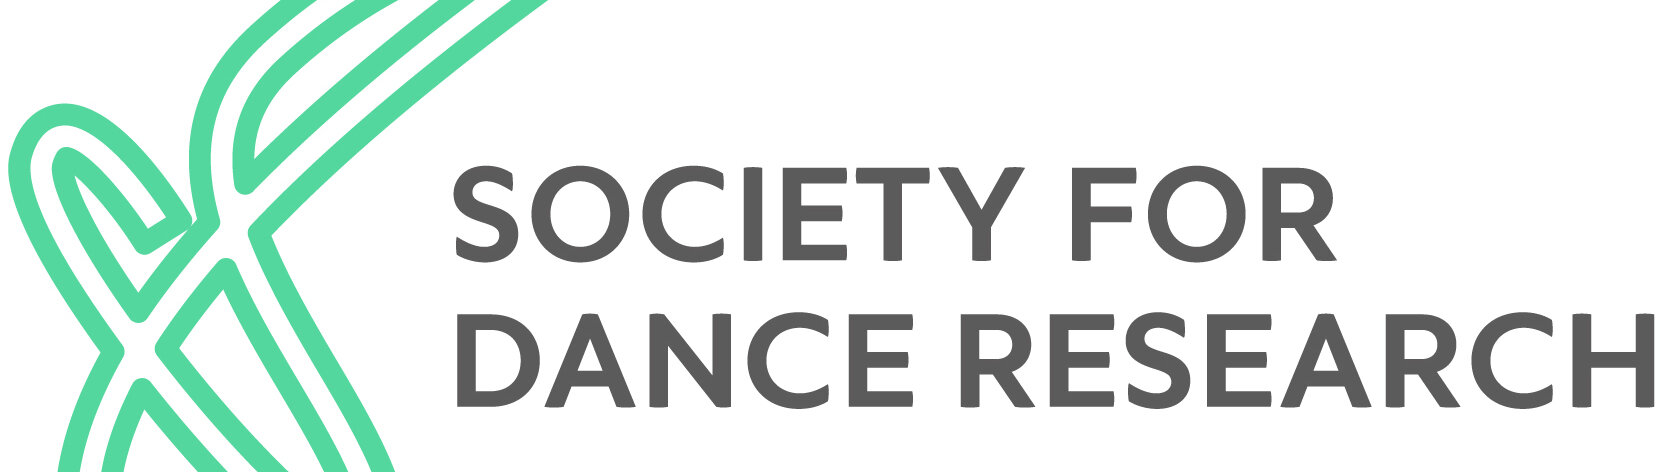 Lynsey McCulloch @ Society for Dance Research's background image'